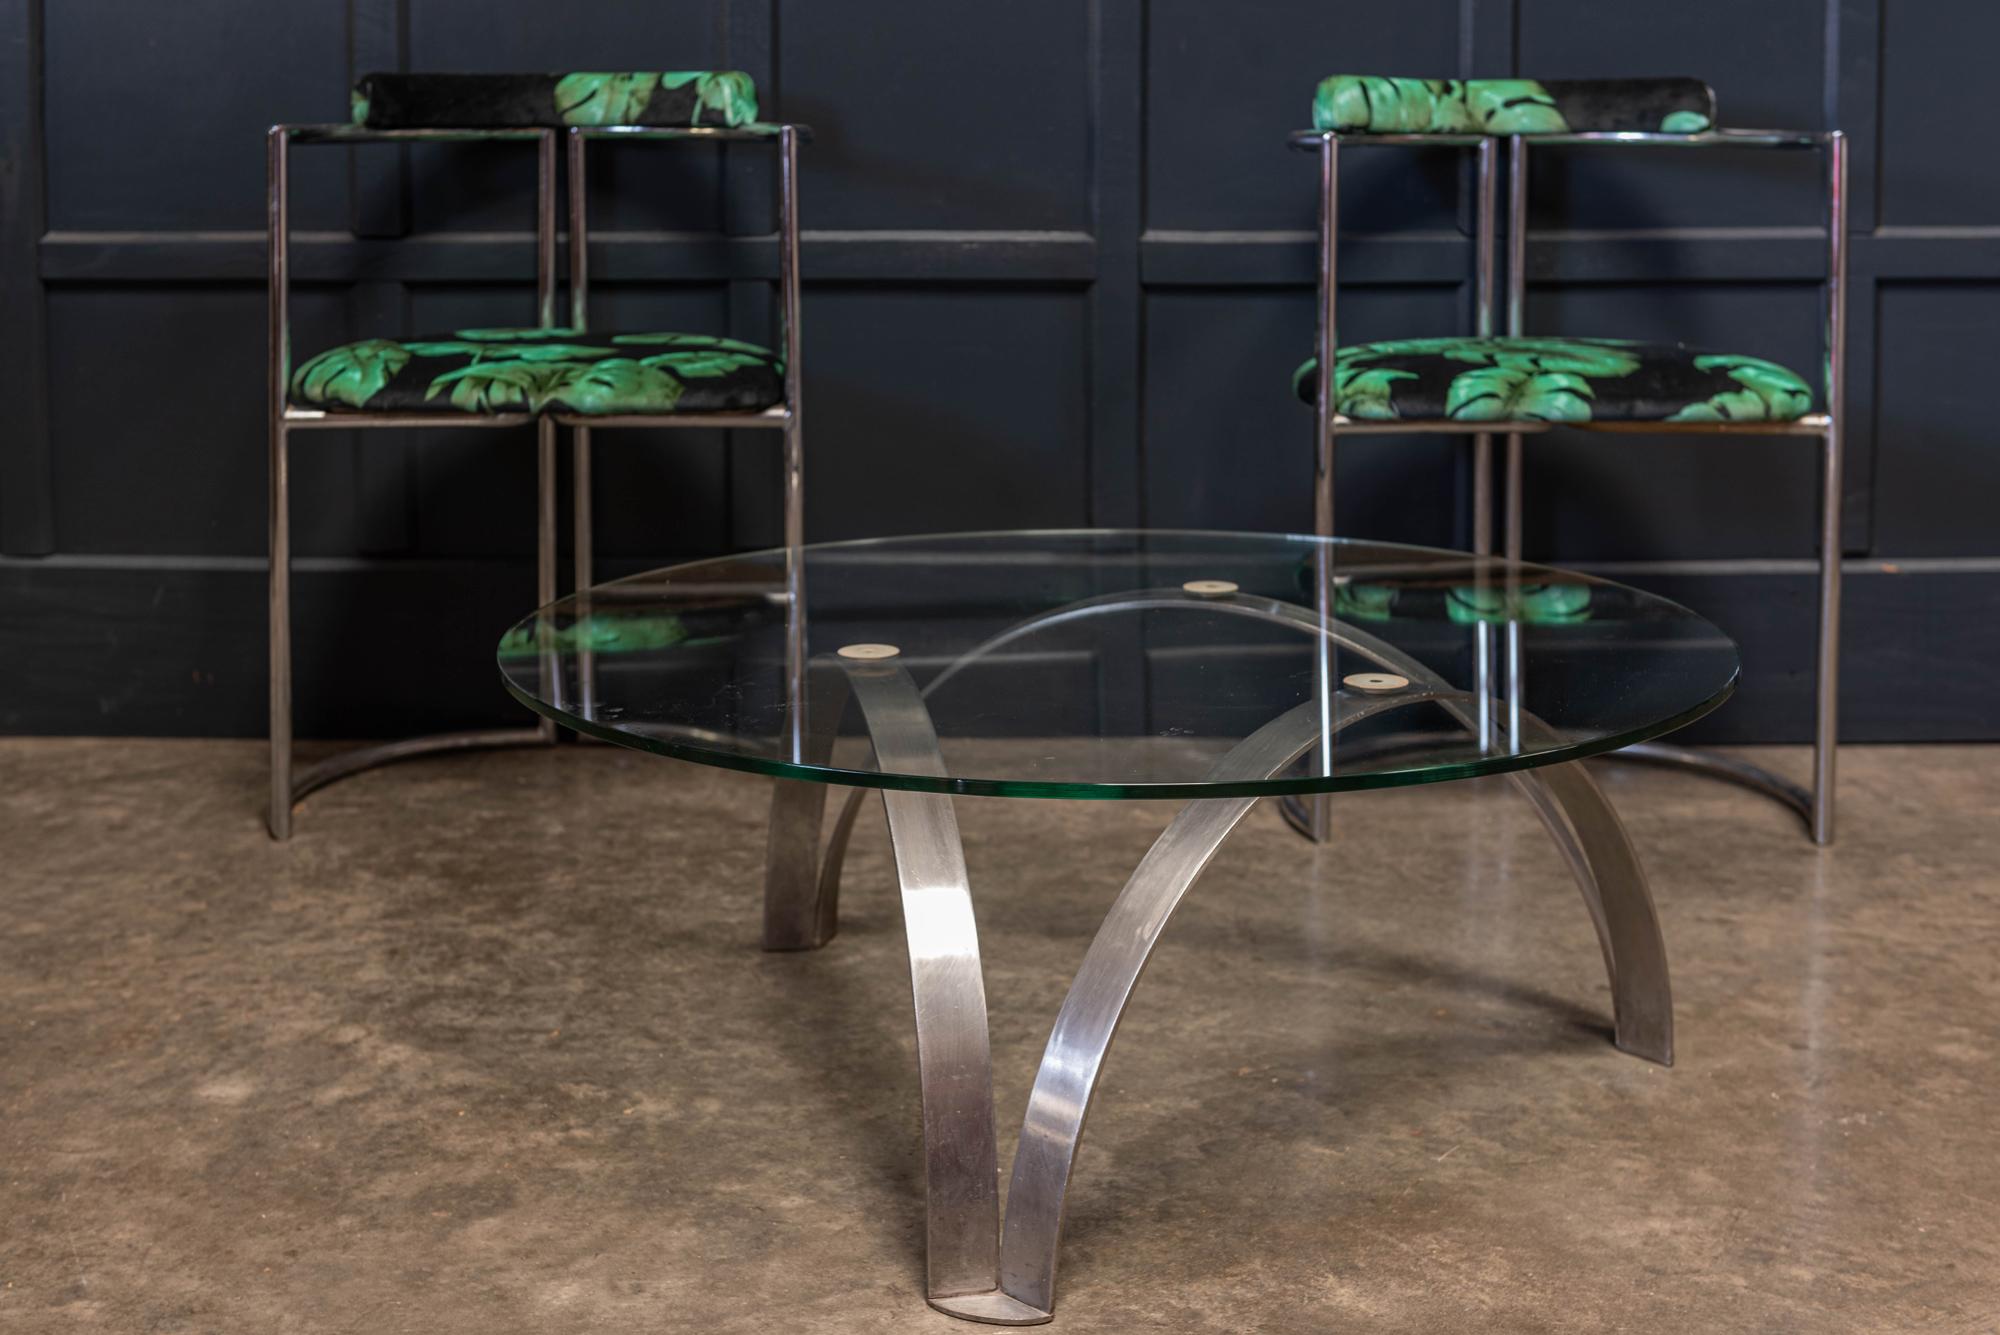 Midcentury Italian sculptural coffee table,
circa 1950s-1960s.

Beautiful sculptural formed stainless steel base with a toughened 10mm thick glass top.

Measures: Diameter 90 cm, height 33 cm.